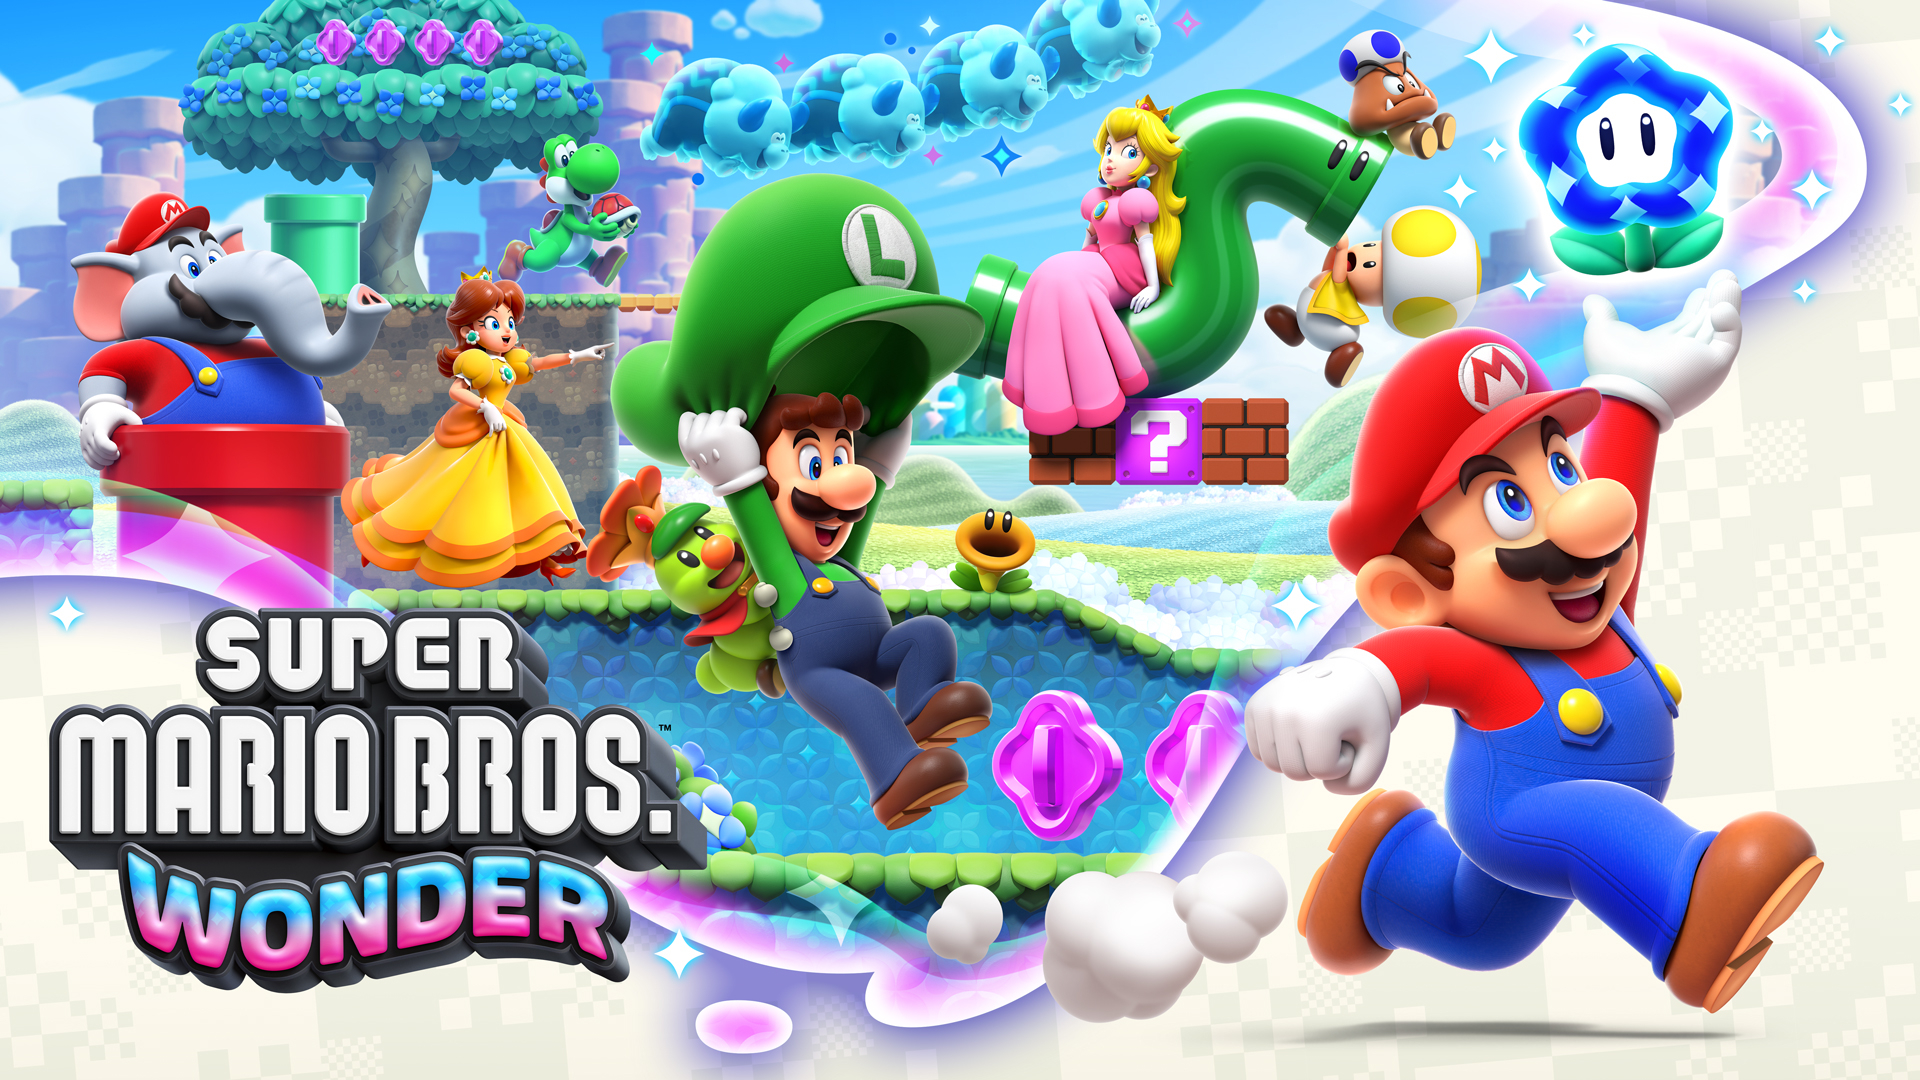 Super Mario Bros. Wonder coming to Switch in October